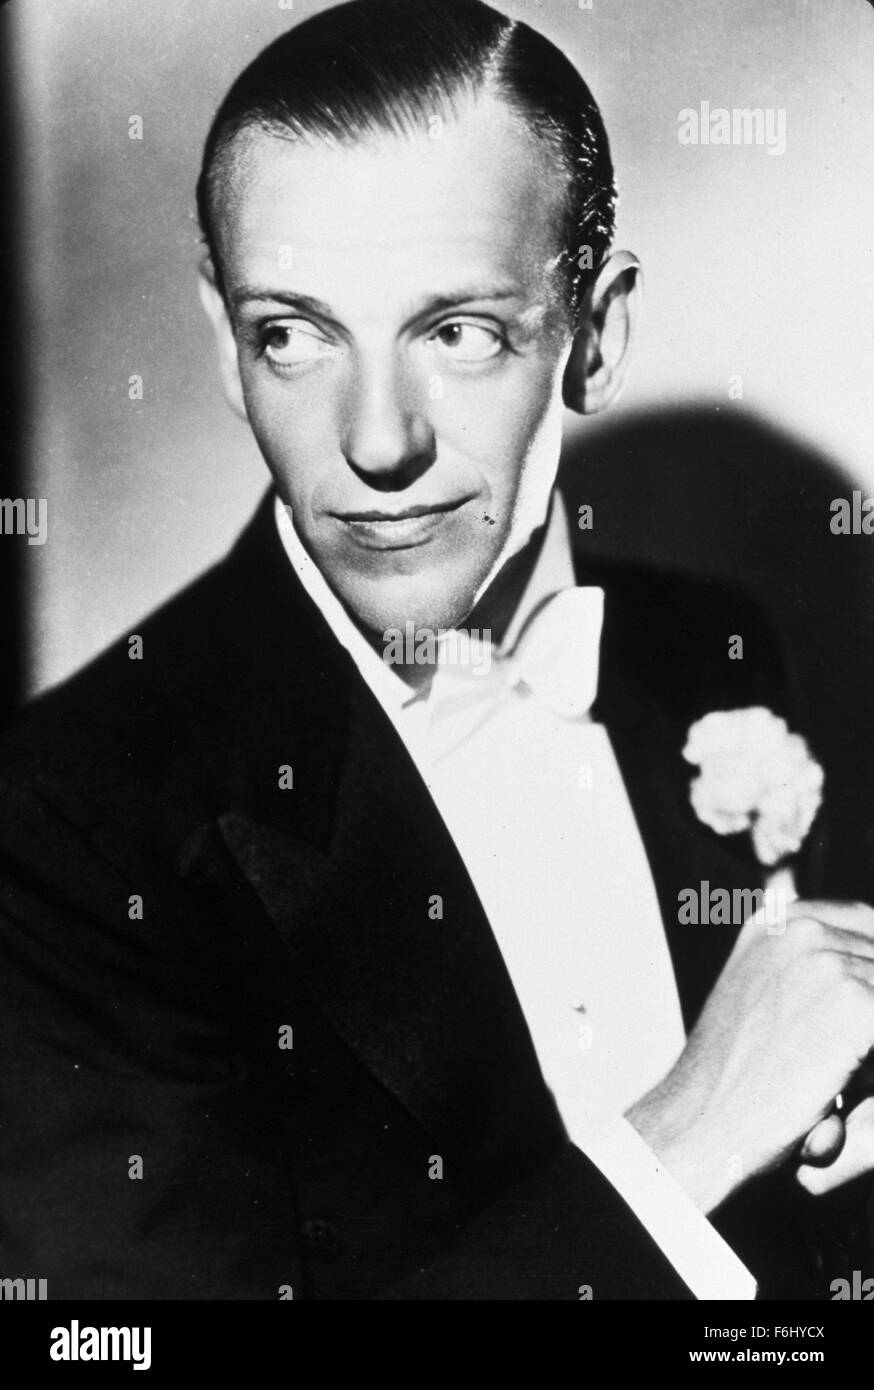 top hat fred astaire full movie